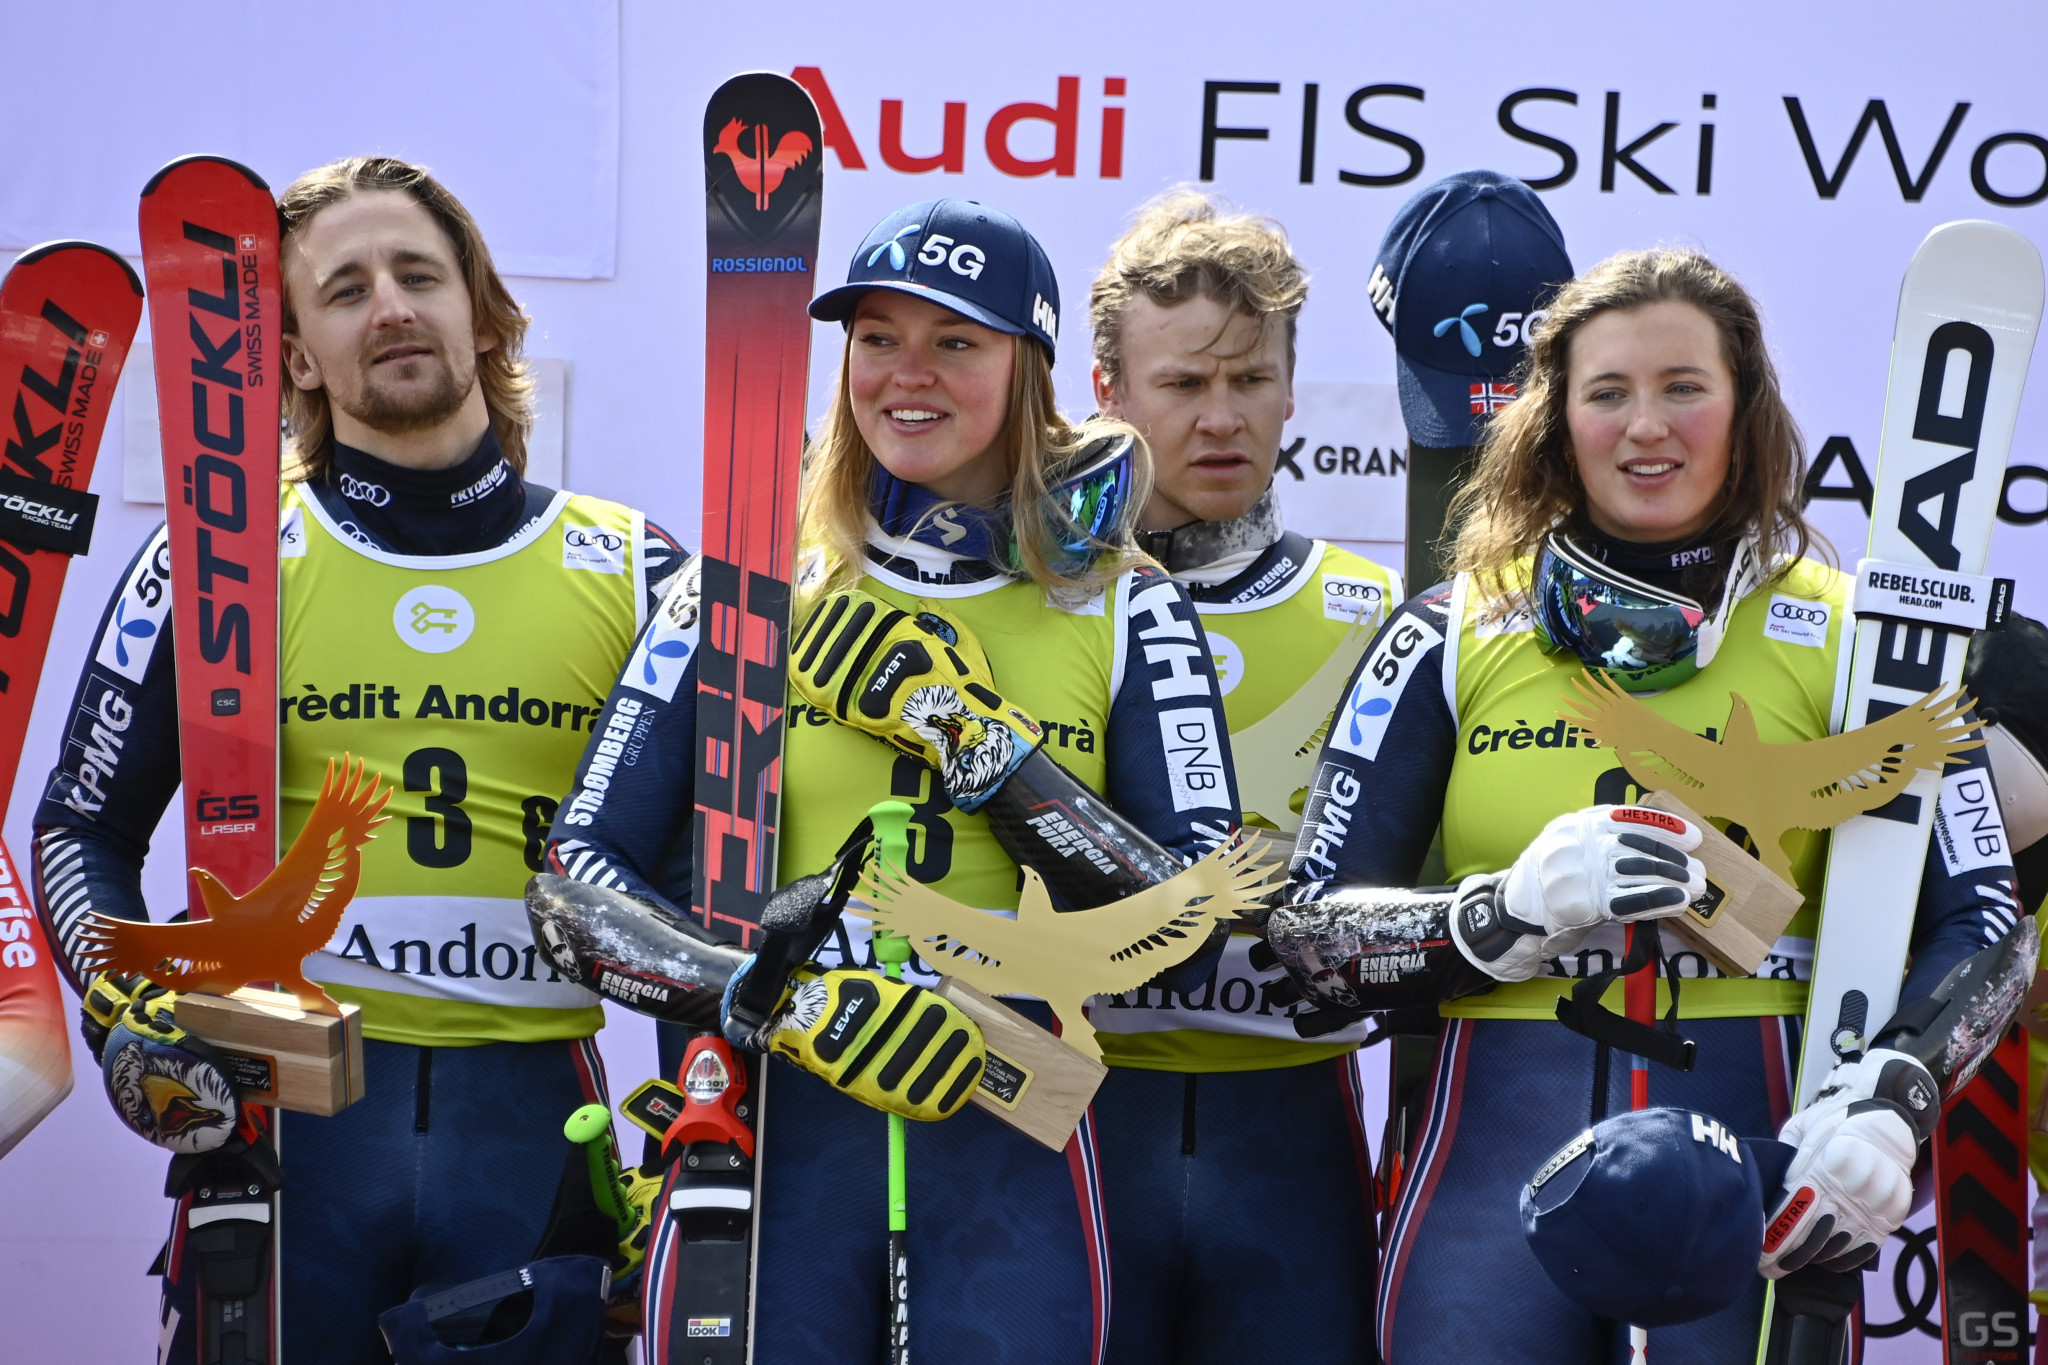 Norway's team on the podium after winning the parallel slalom title in Soldeu ©Getty Images